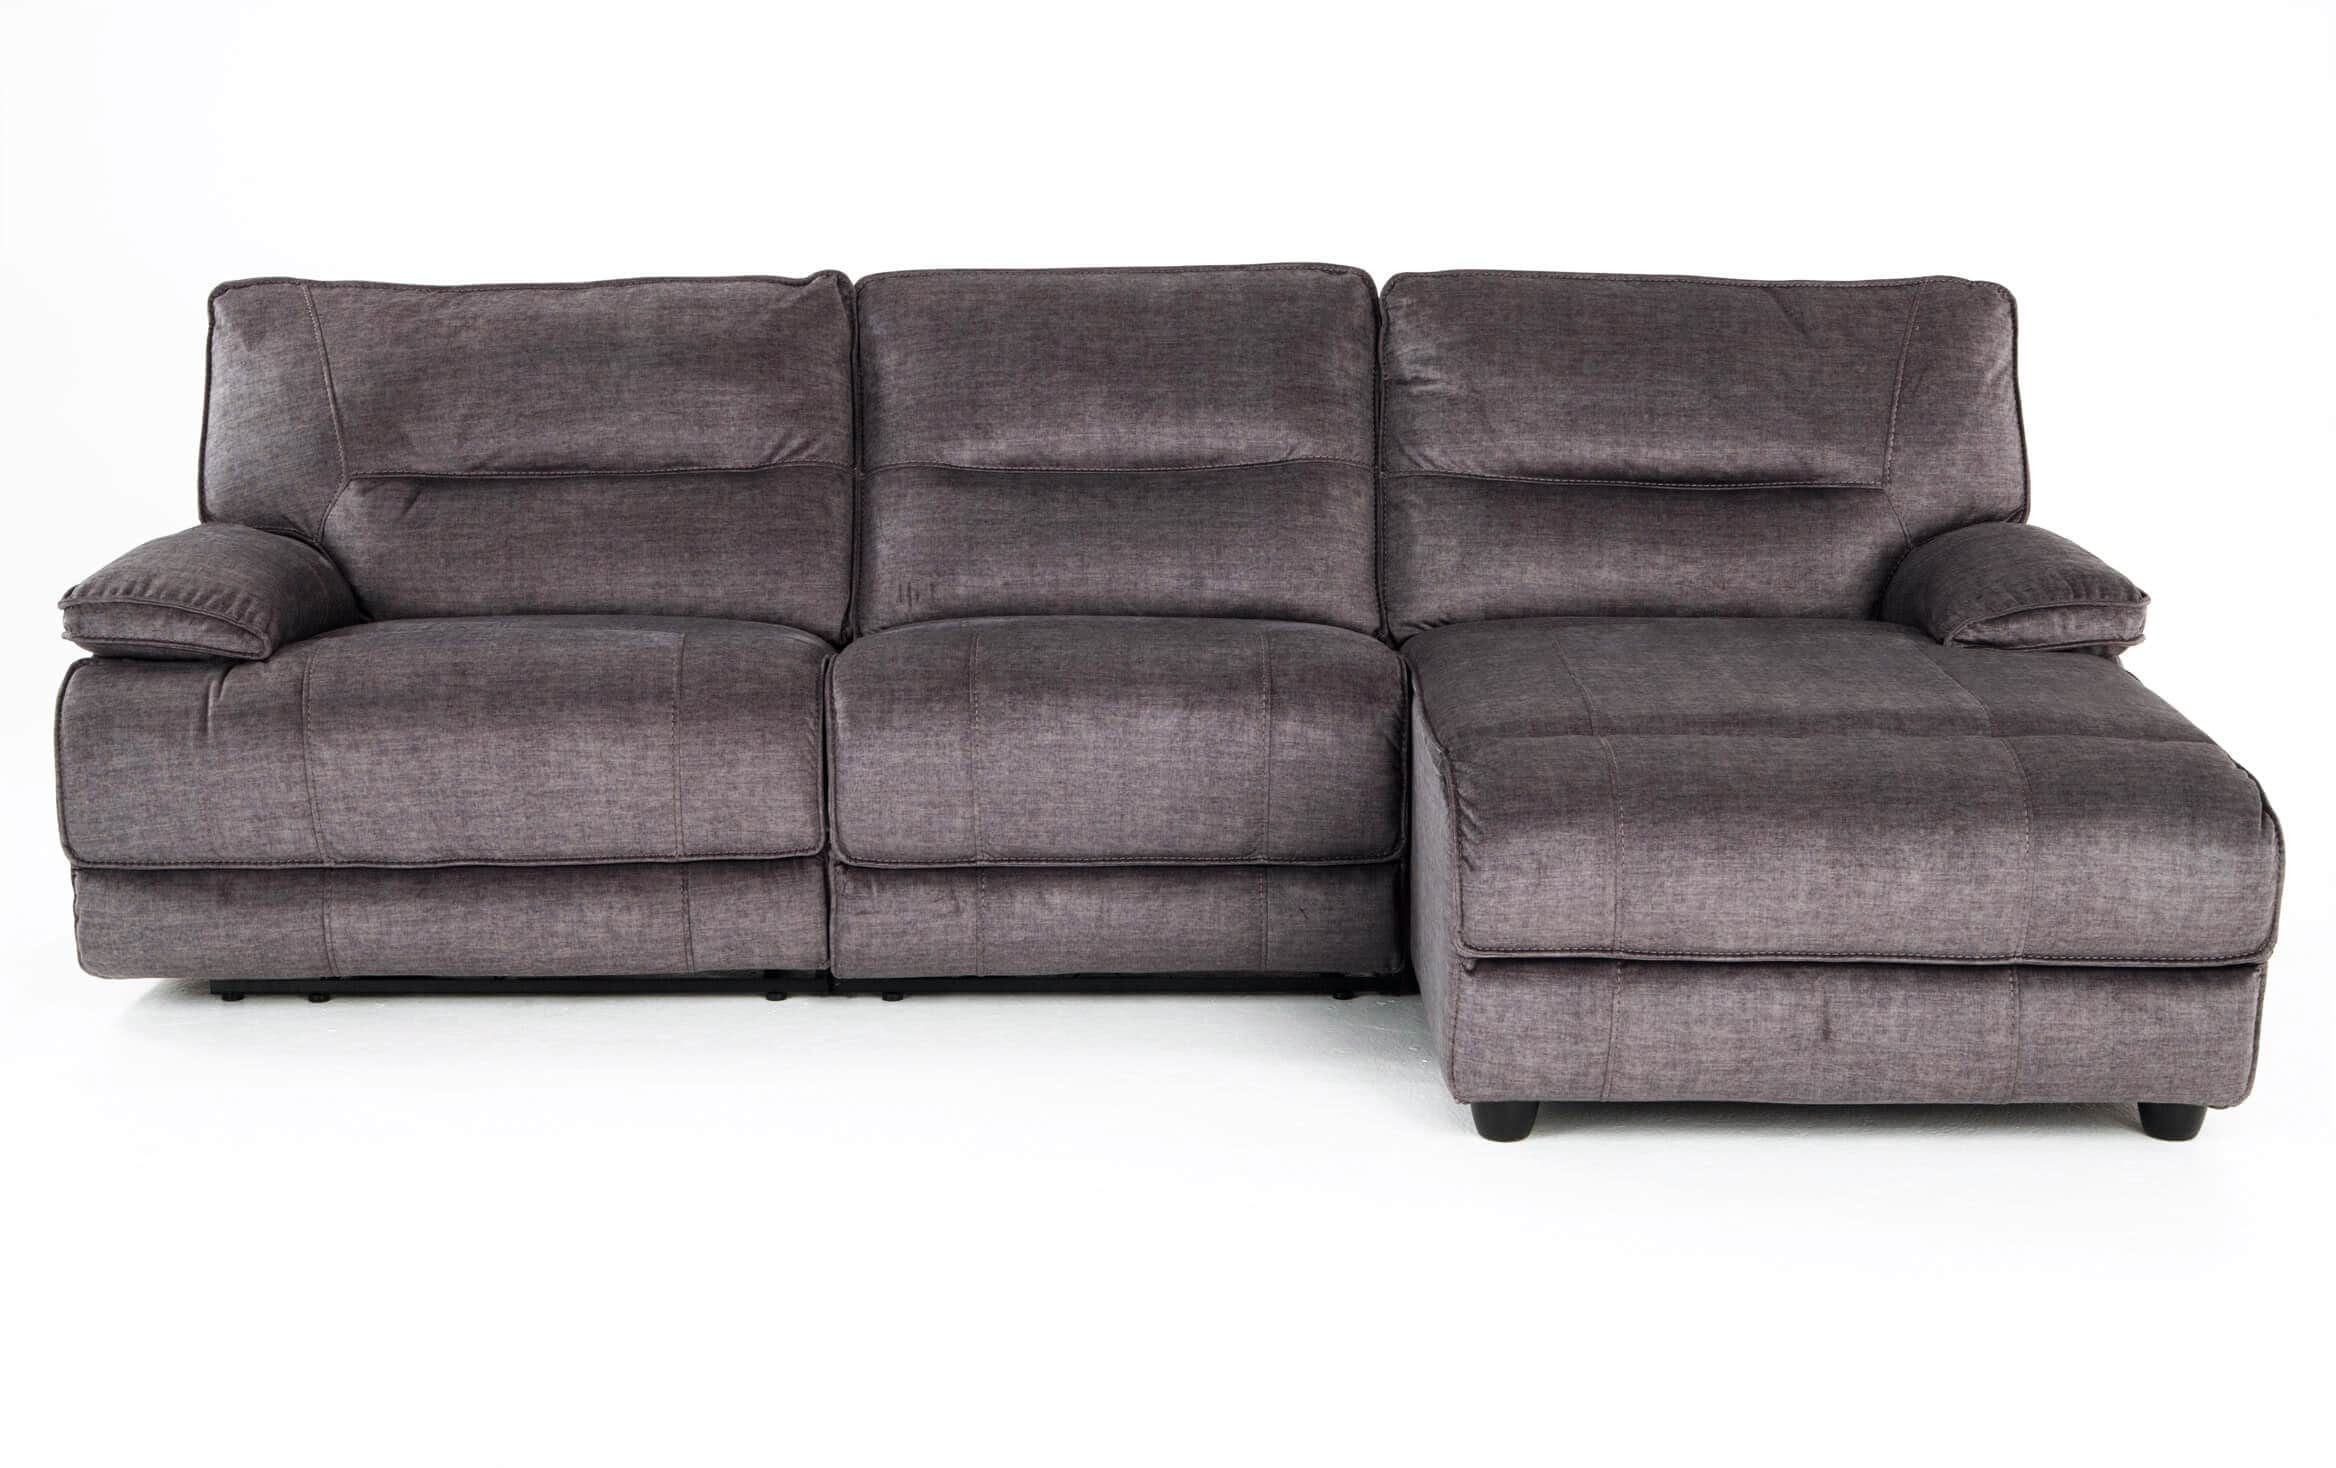 Pacifica Gray 3 Piece Power Reclining Left Arm Facing With Pacifica Gray Power Reclining Sofas (View 8 of 15)